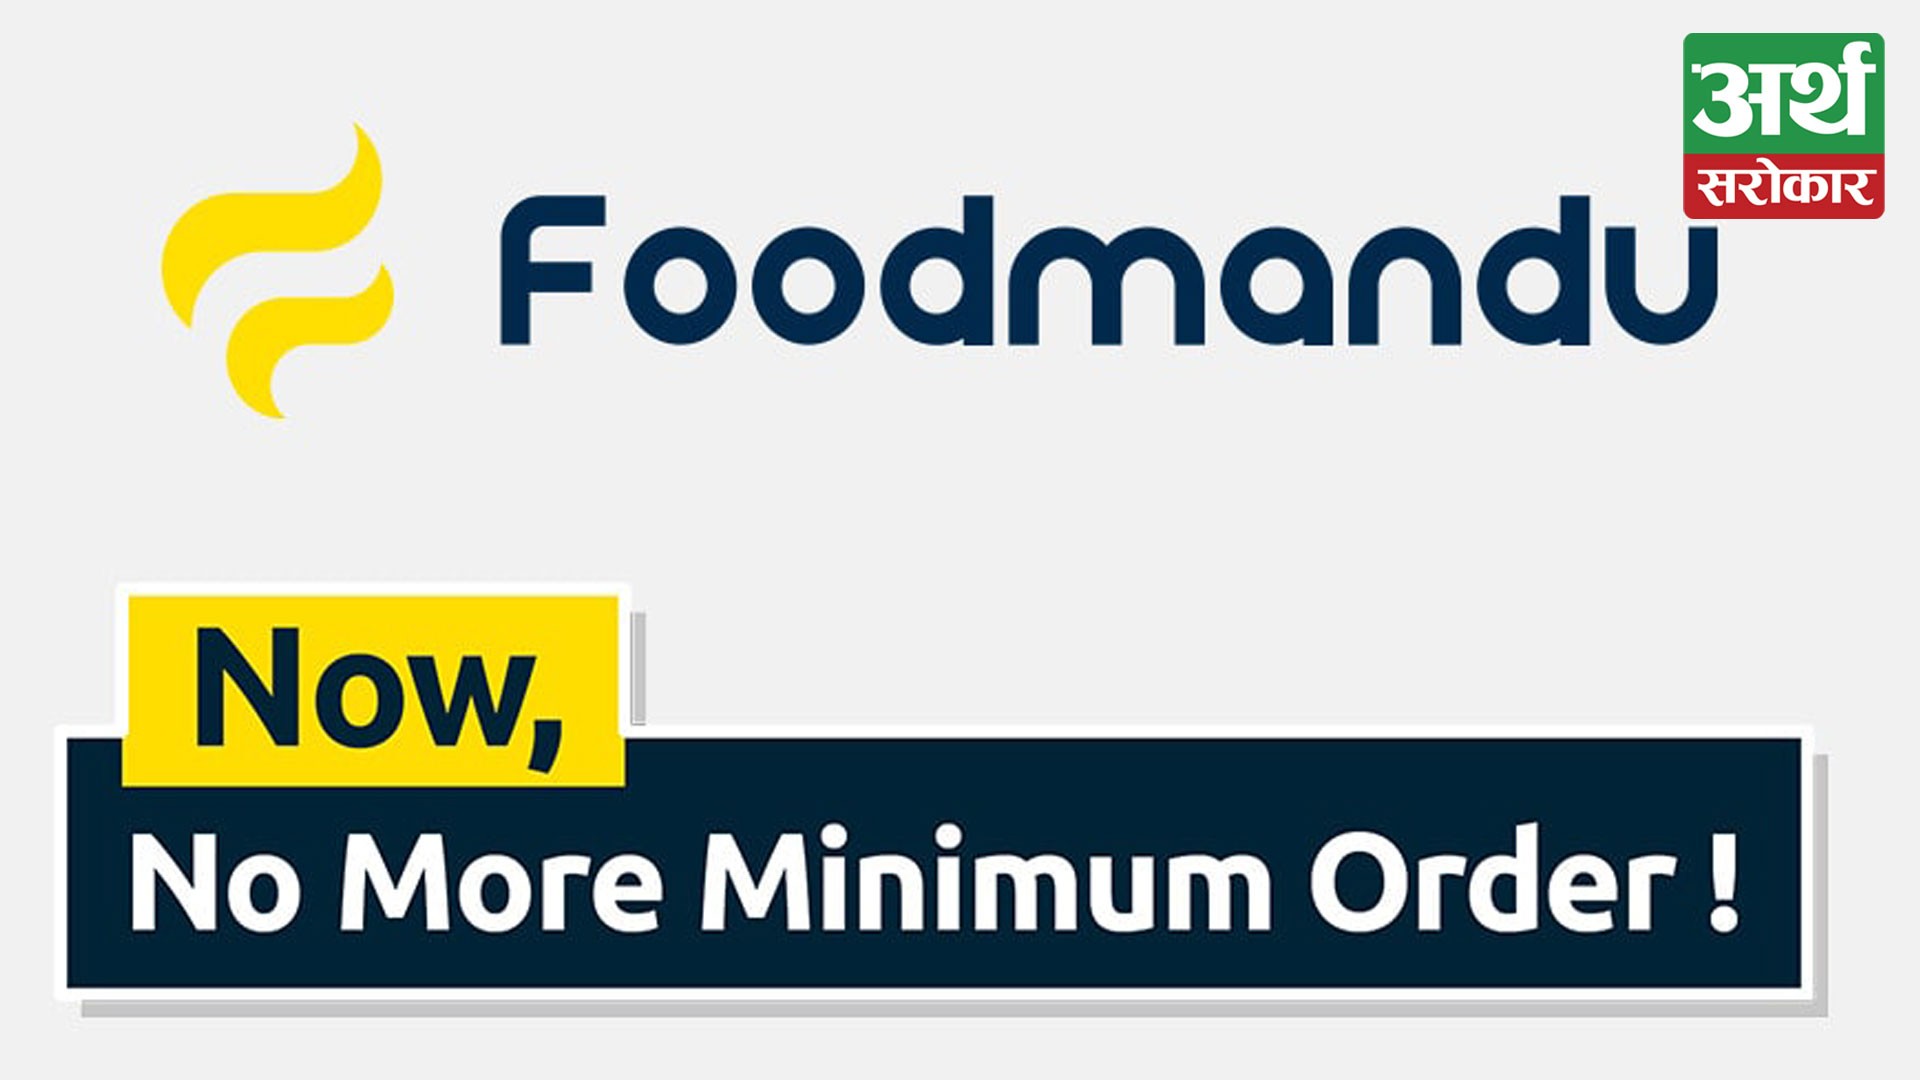 Foodmandu Puts Customers First: No Minimum Order and Reduced Delivery Fees